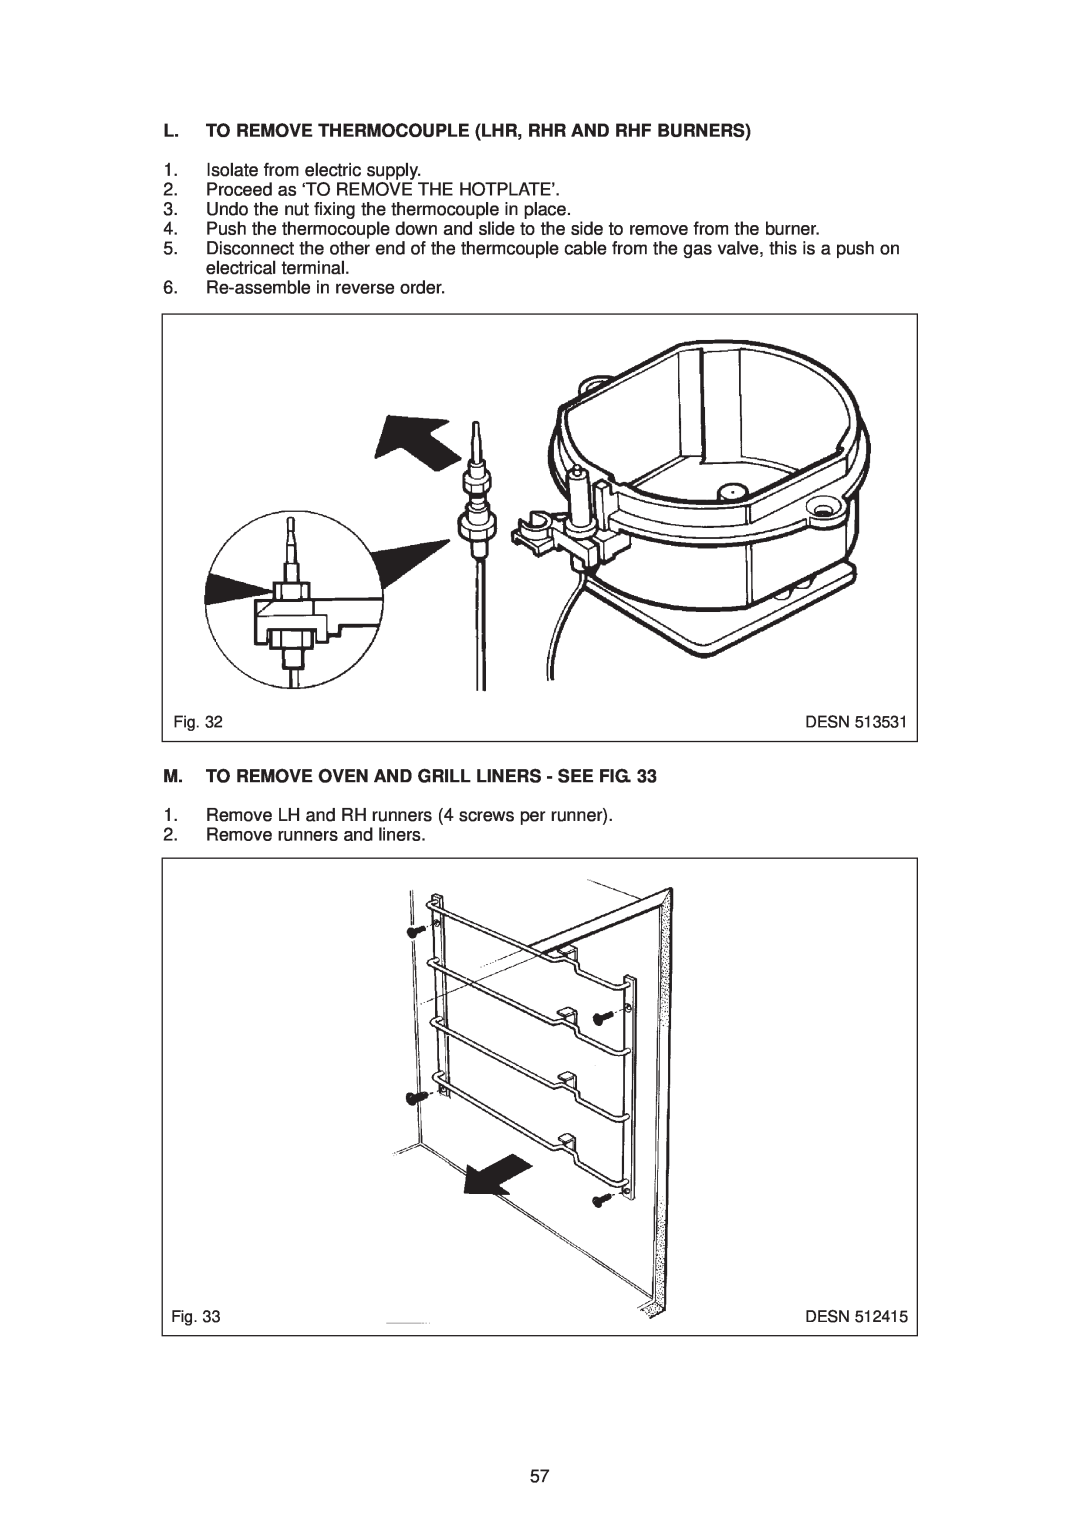 Aga Ranges DESN 512387 A L. To Remove Thermocouple Lhr, Rhr And Rhf Burners, M. To Remove Oven And Grill Liners - See Fig 